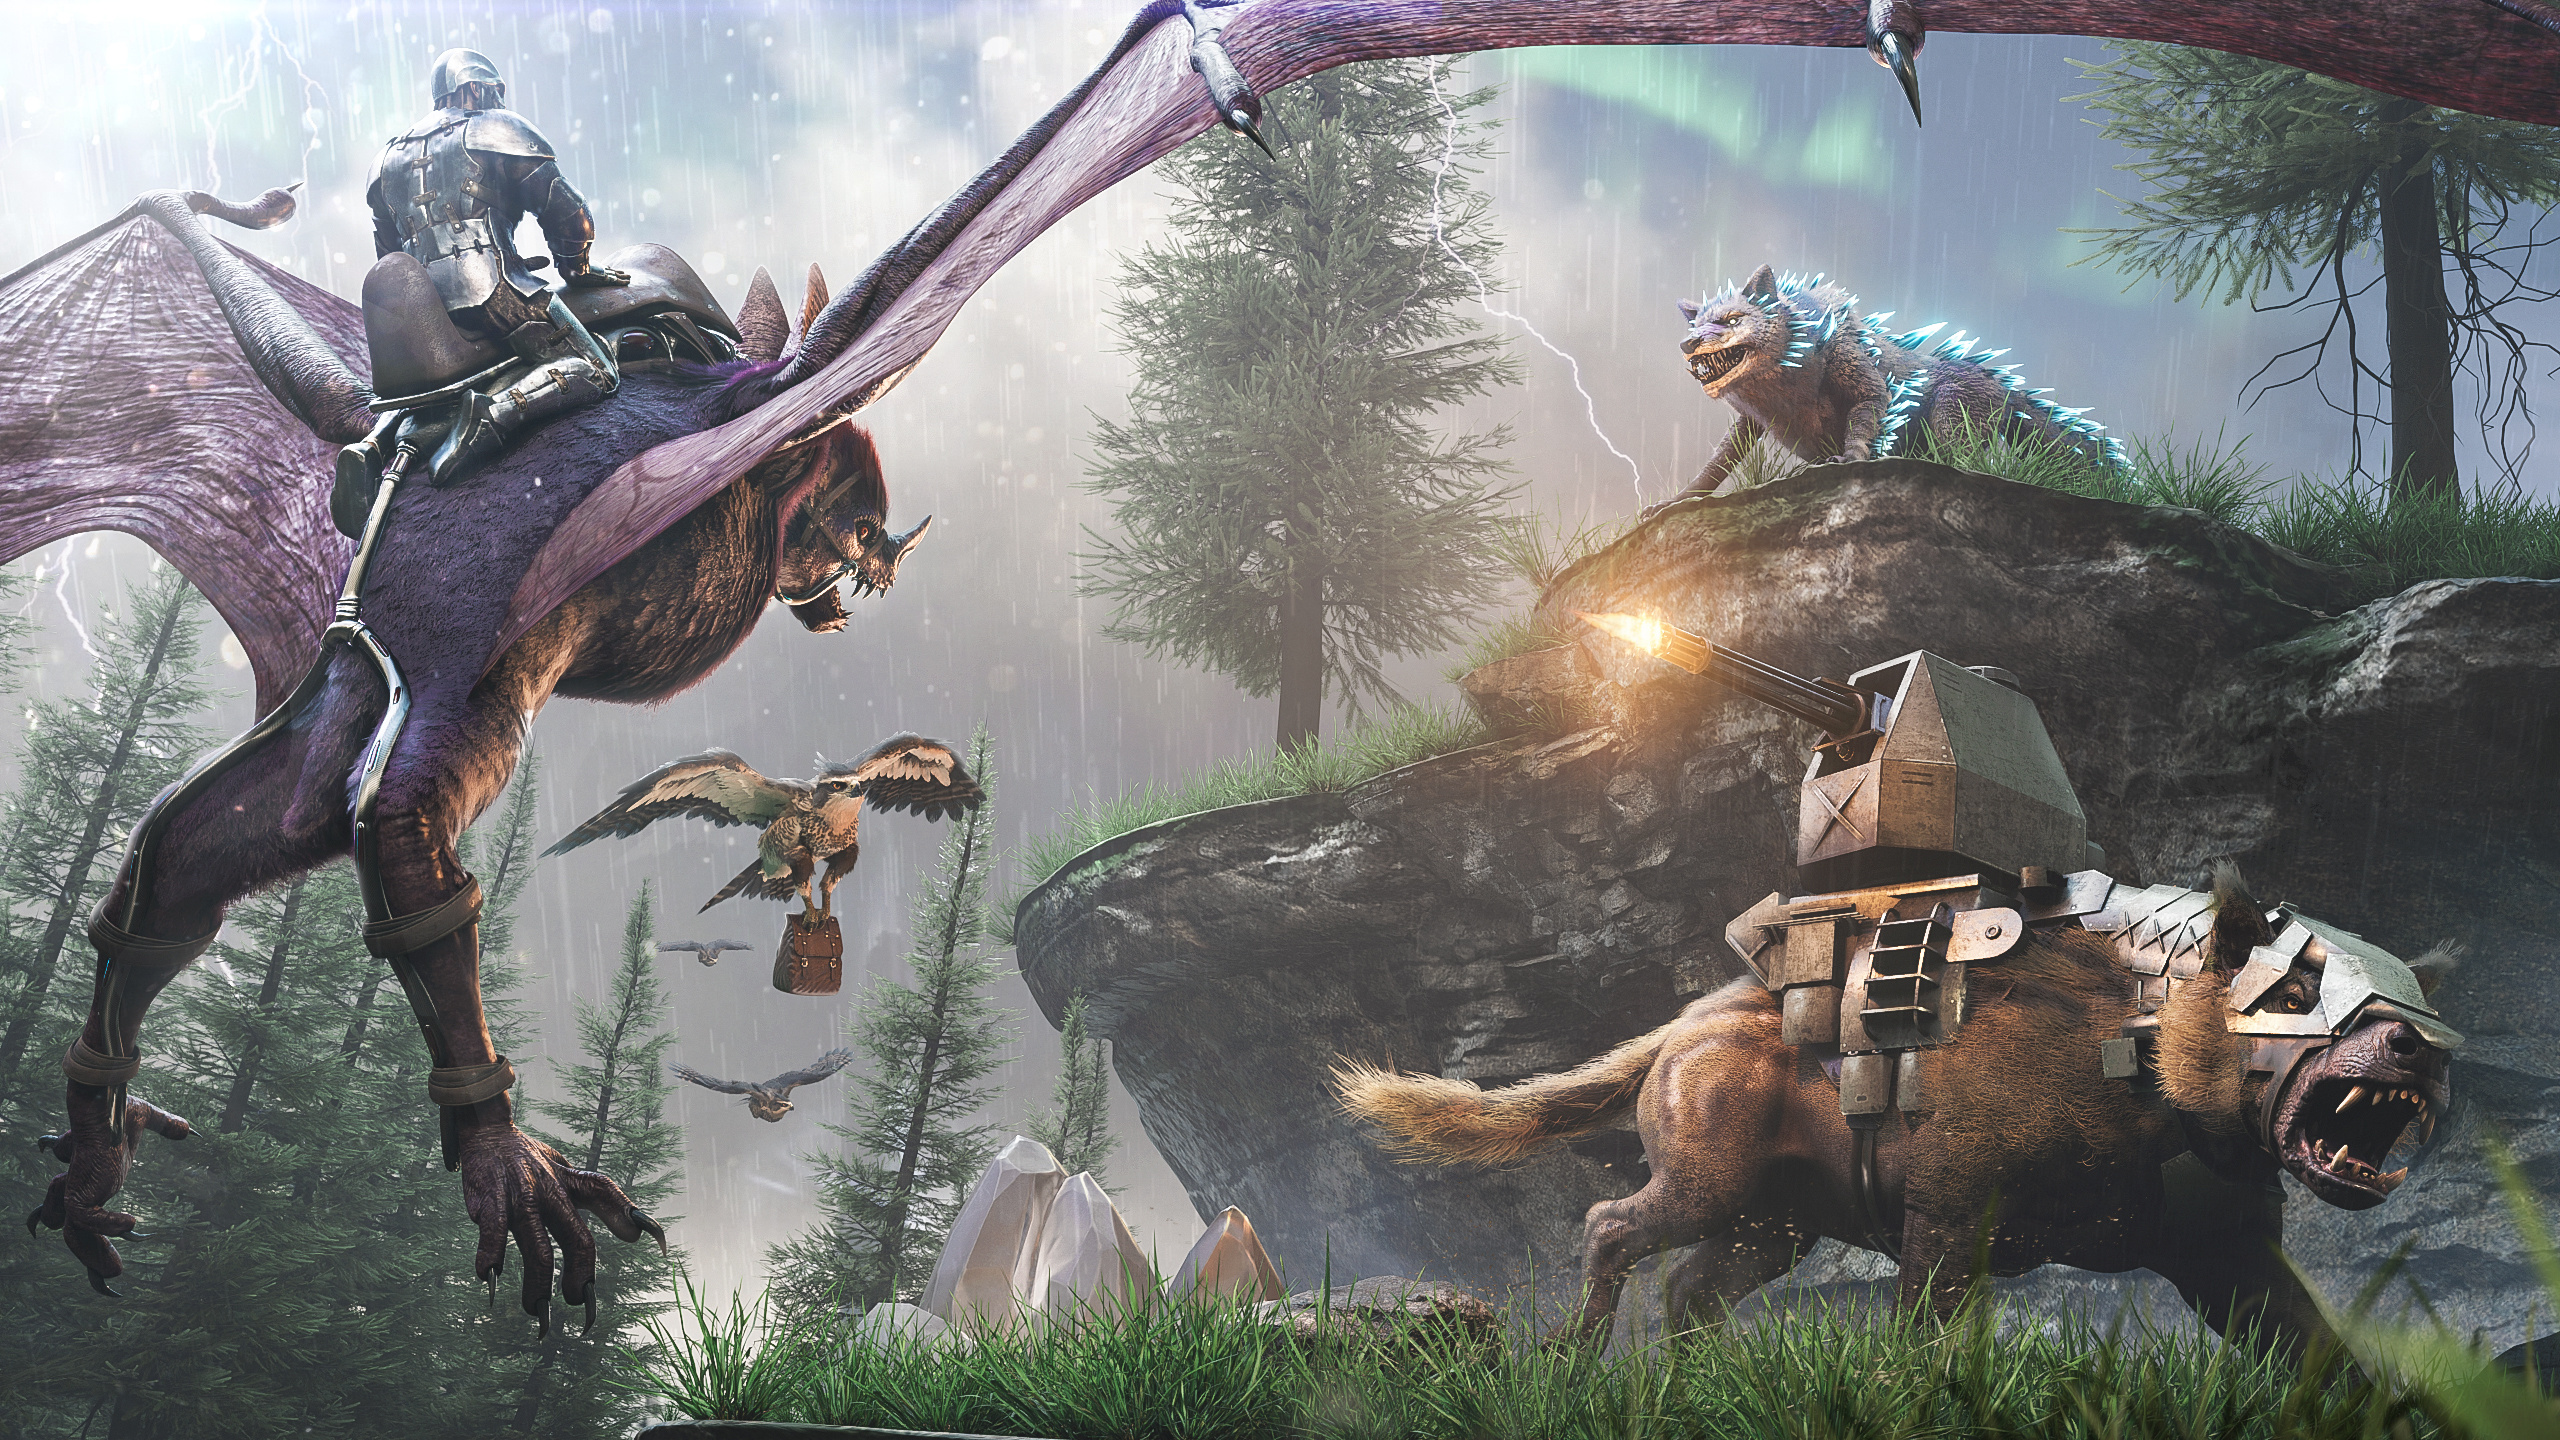 ARK: Survival Evolved: Original robotic creatures, The Enforcer and Scout. 2560x1440 HD Wallpaper.